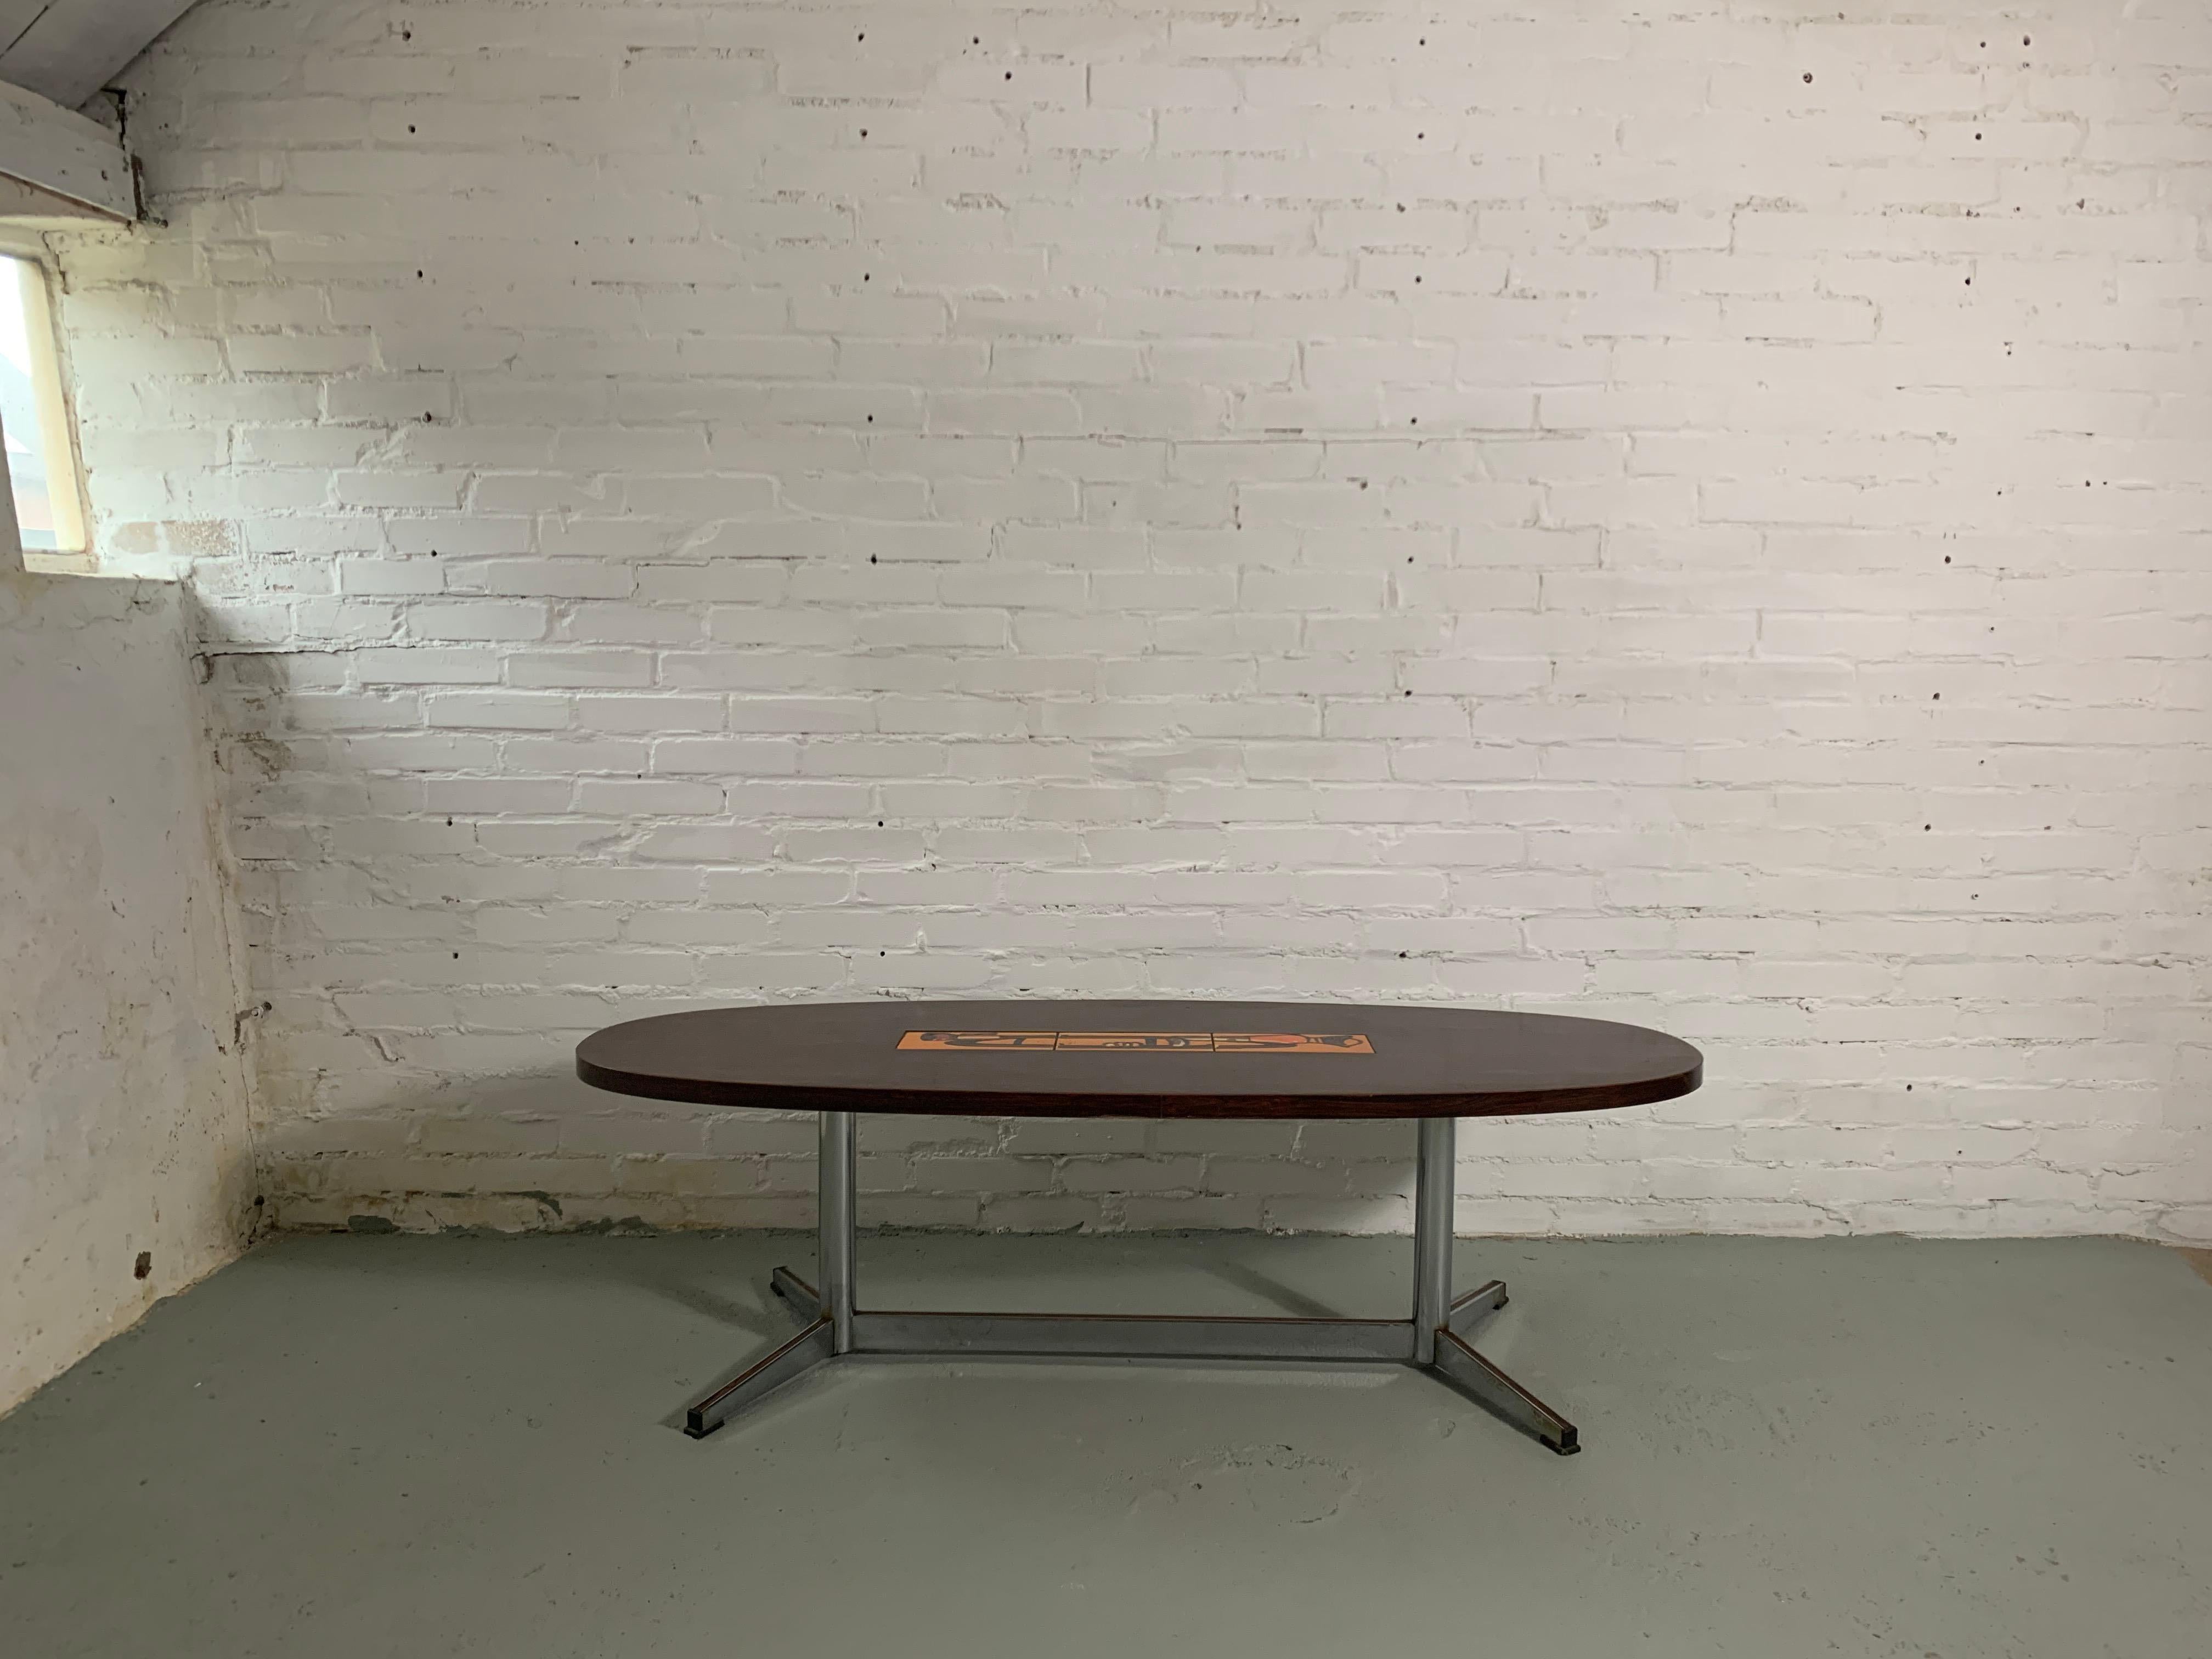 Rosewood cofee table with ceramic in warm orange colours and steel chromed legs. Decorative, stylish, in good vintage condition.
H42.0 x W140.0 x D50.0 cm